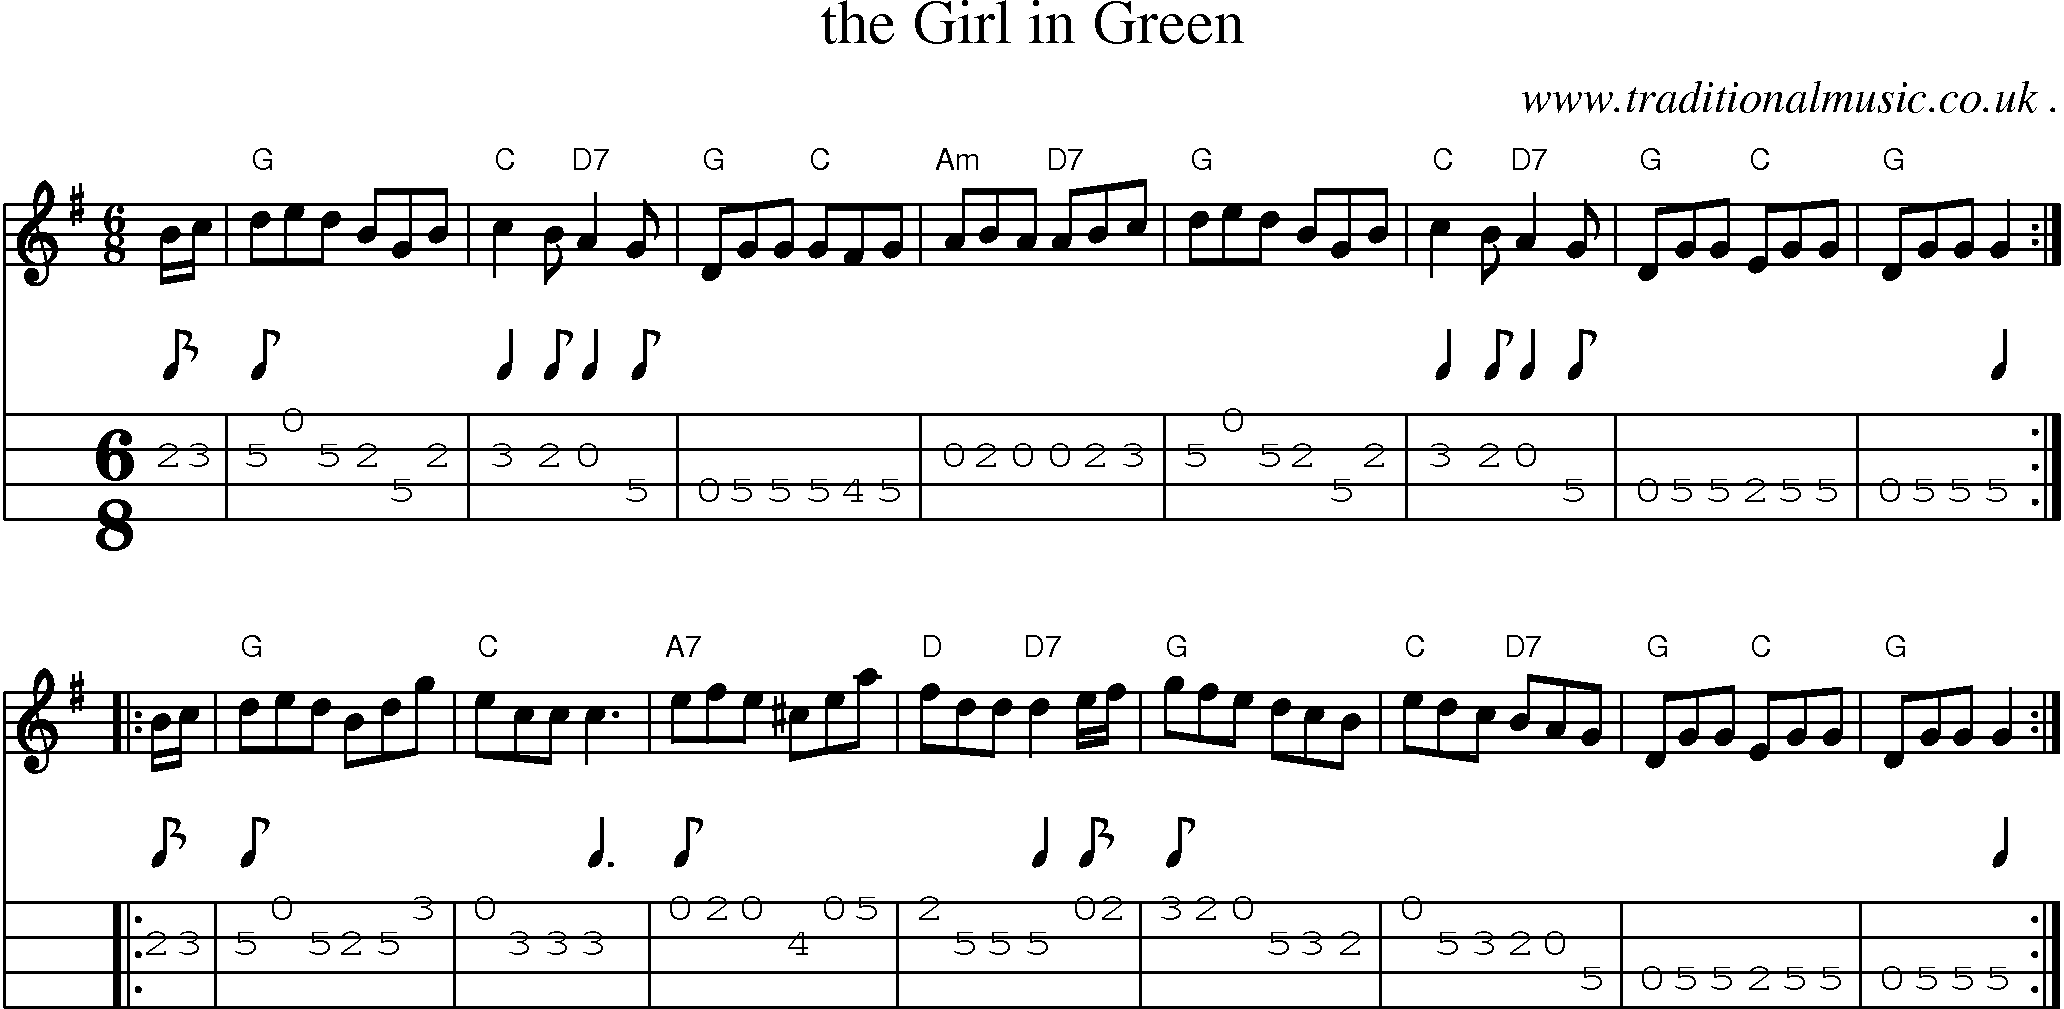 Sheet-music  score, Chords and Mandolin Tabs for The Girl In Green